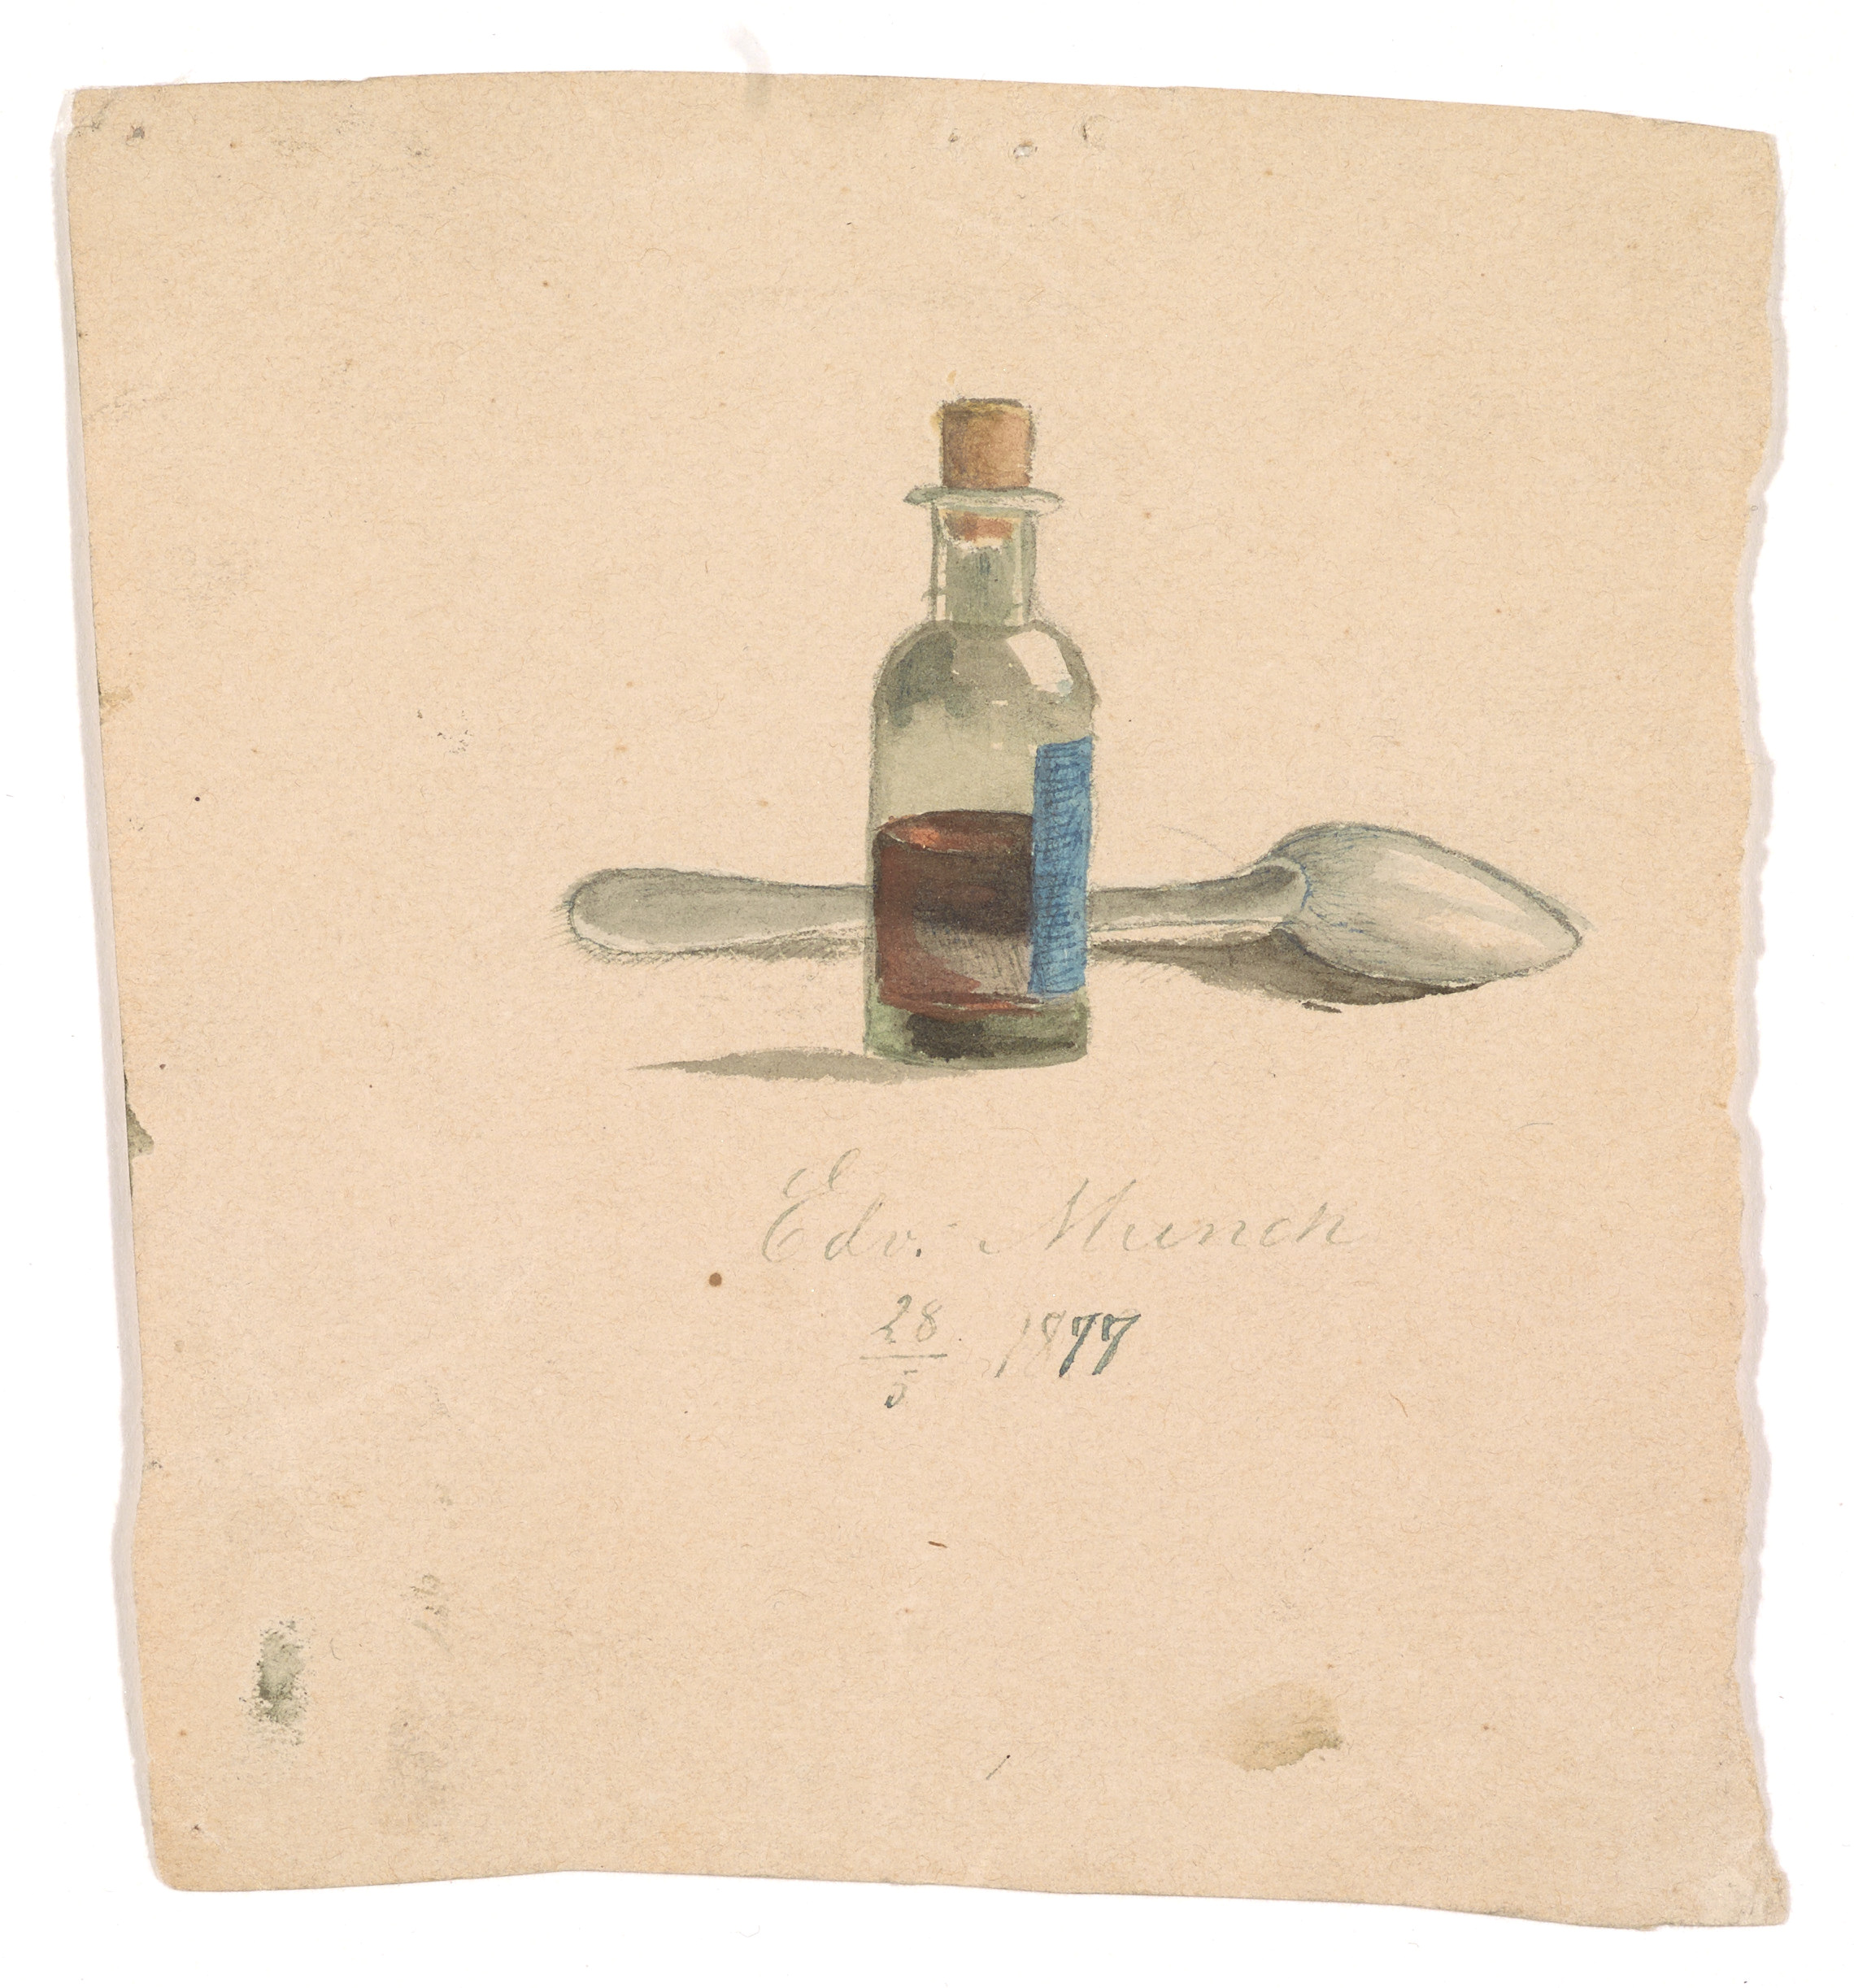 Edvard Munch: Medicine bottle and spoon. Watercolor on paper, 1877. Photo © Munchmuseet